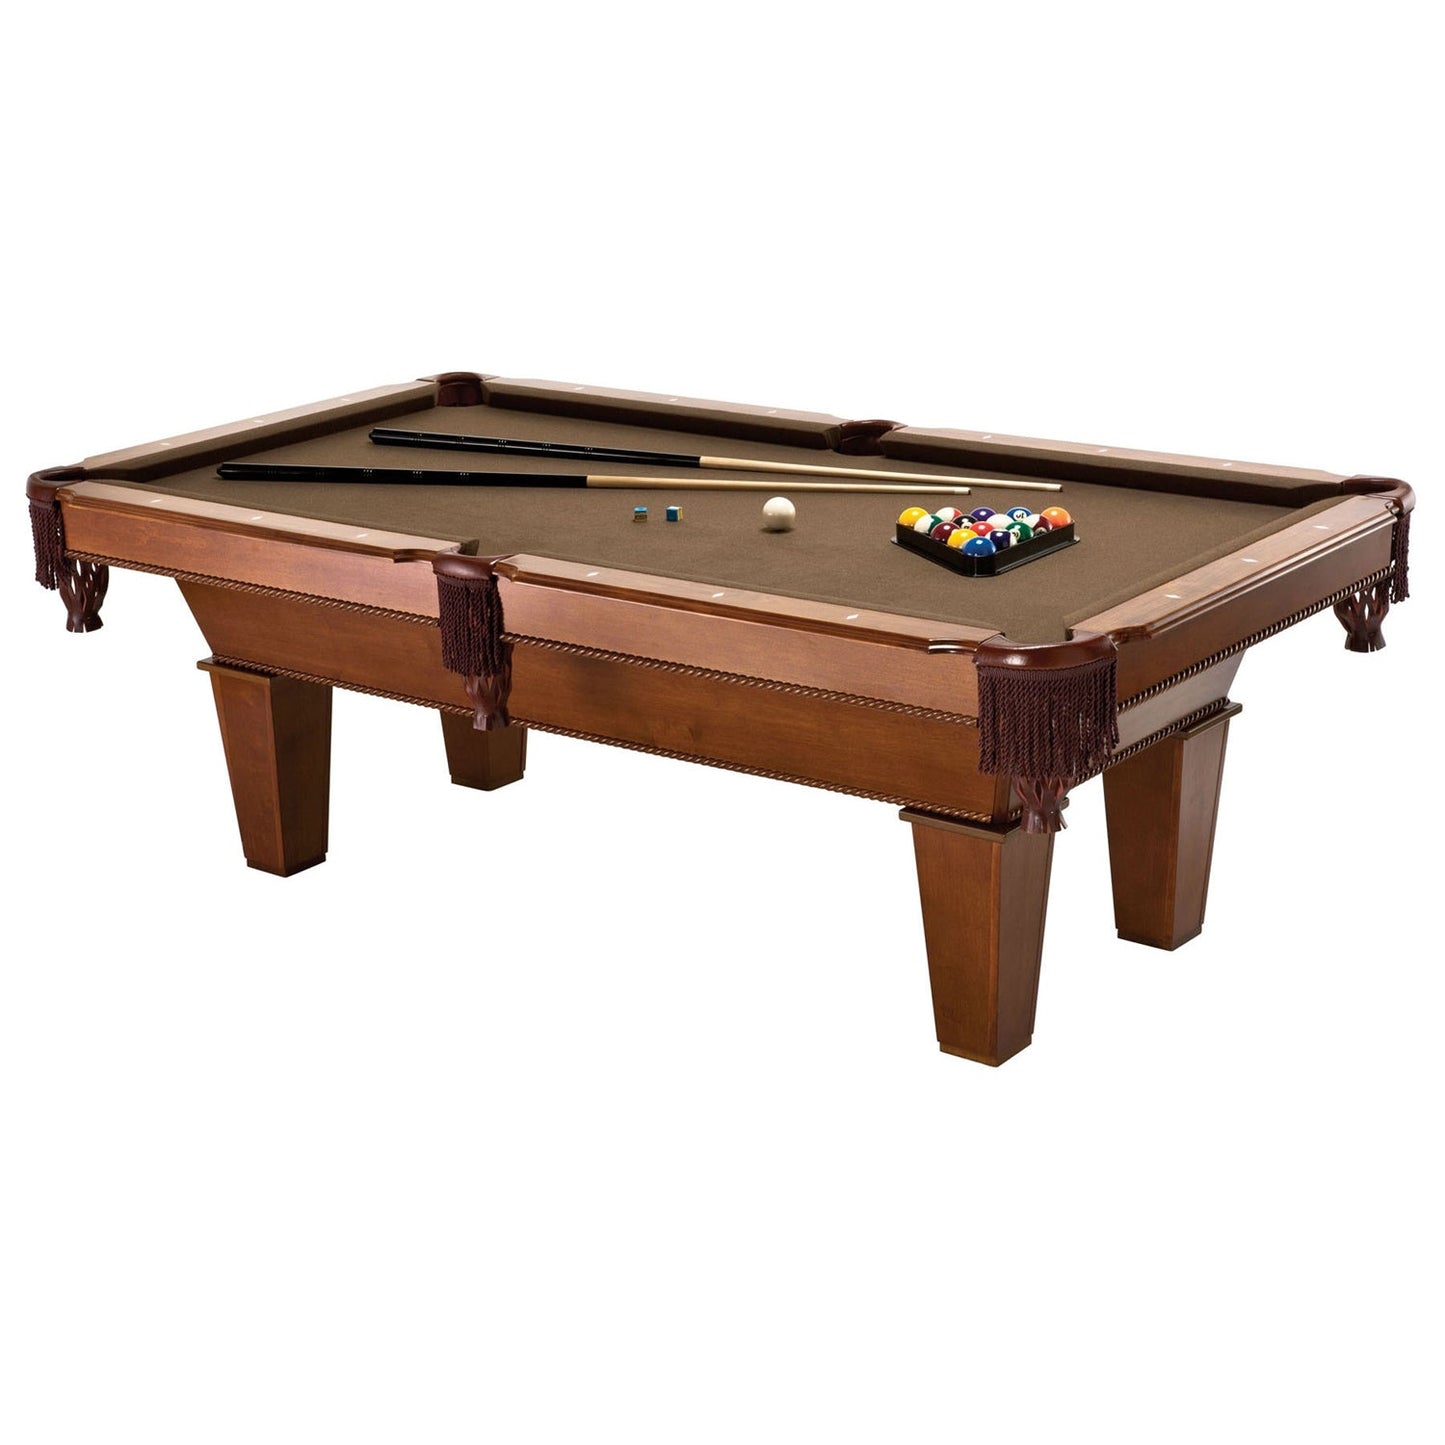 7Ft Brown Wool Cloth Top Pool Table with 2 Cues and Billiards Balls